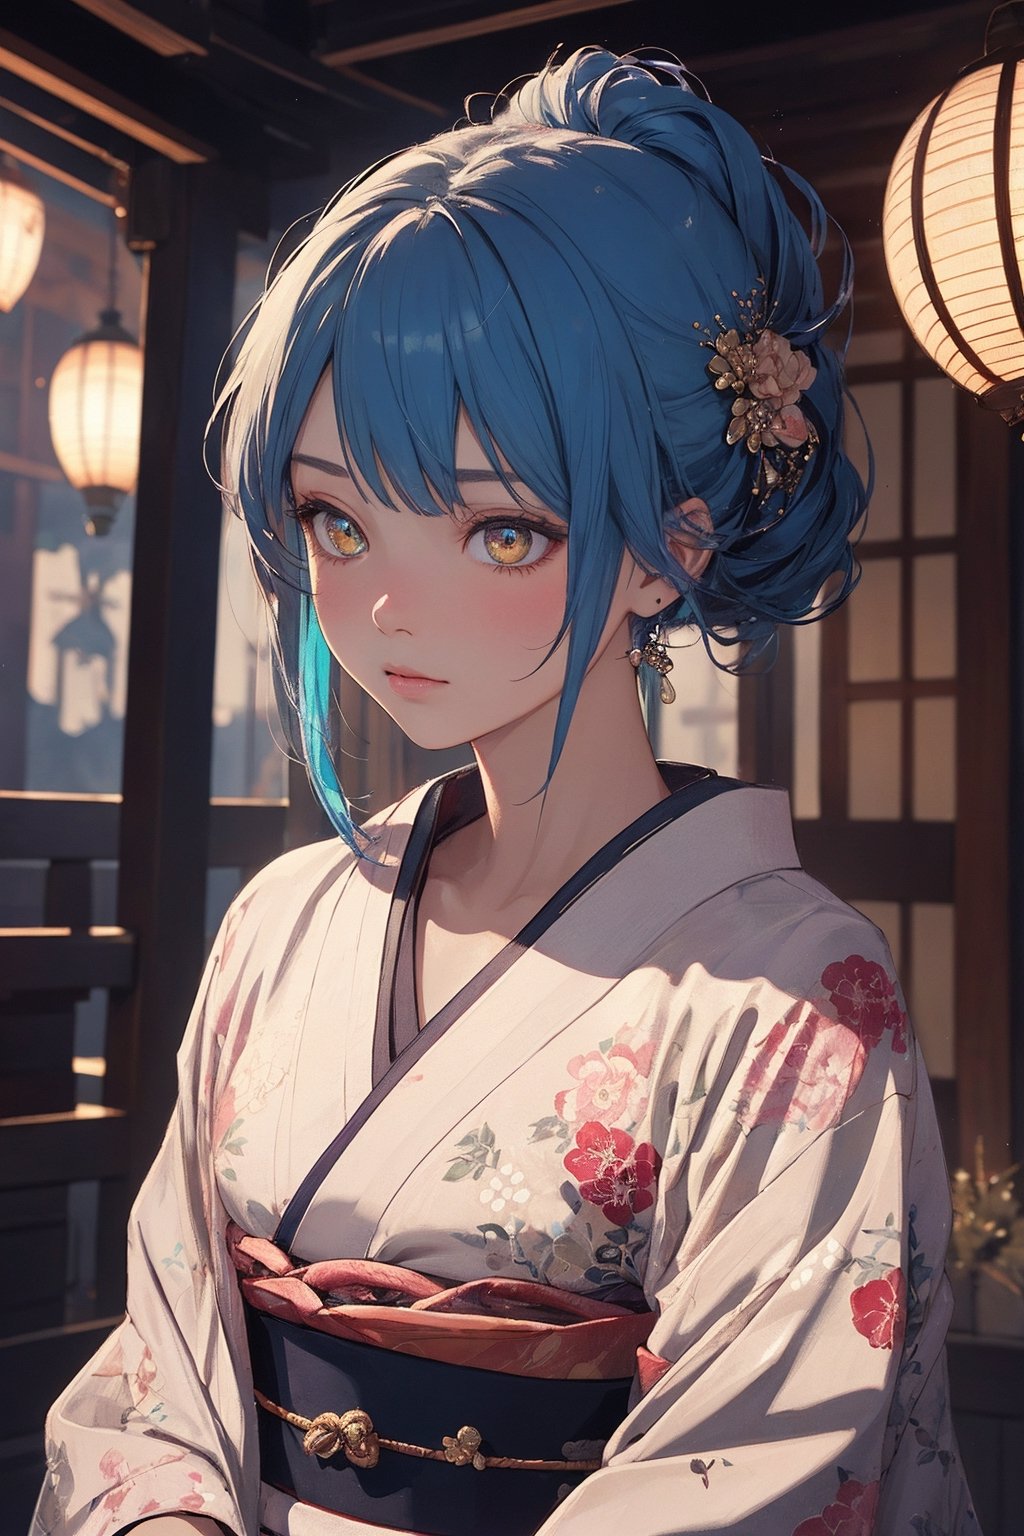 A Ultra realistic, a stunningly girl in (Peony pattern kimono:0.9), ornaments, flirting, filigree, colorful, sparkels, highlights, digital art, masterwork, blue hair, shrine, amber eyes, chignon, dark theme, soothing tones, muted colors, high contrast, (natural skin texture, hyperrealism, soft light, sharp)